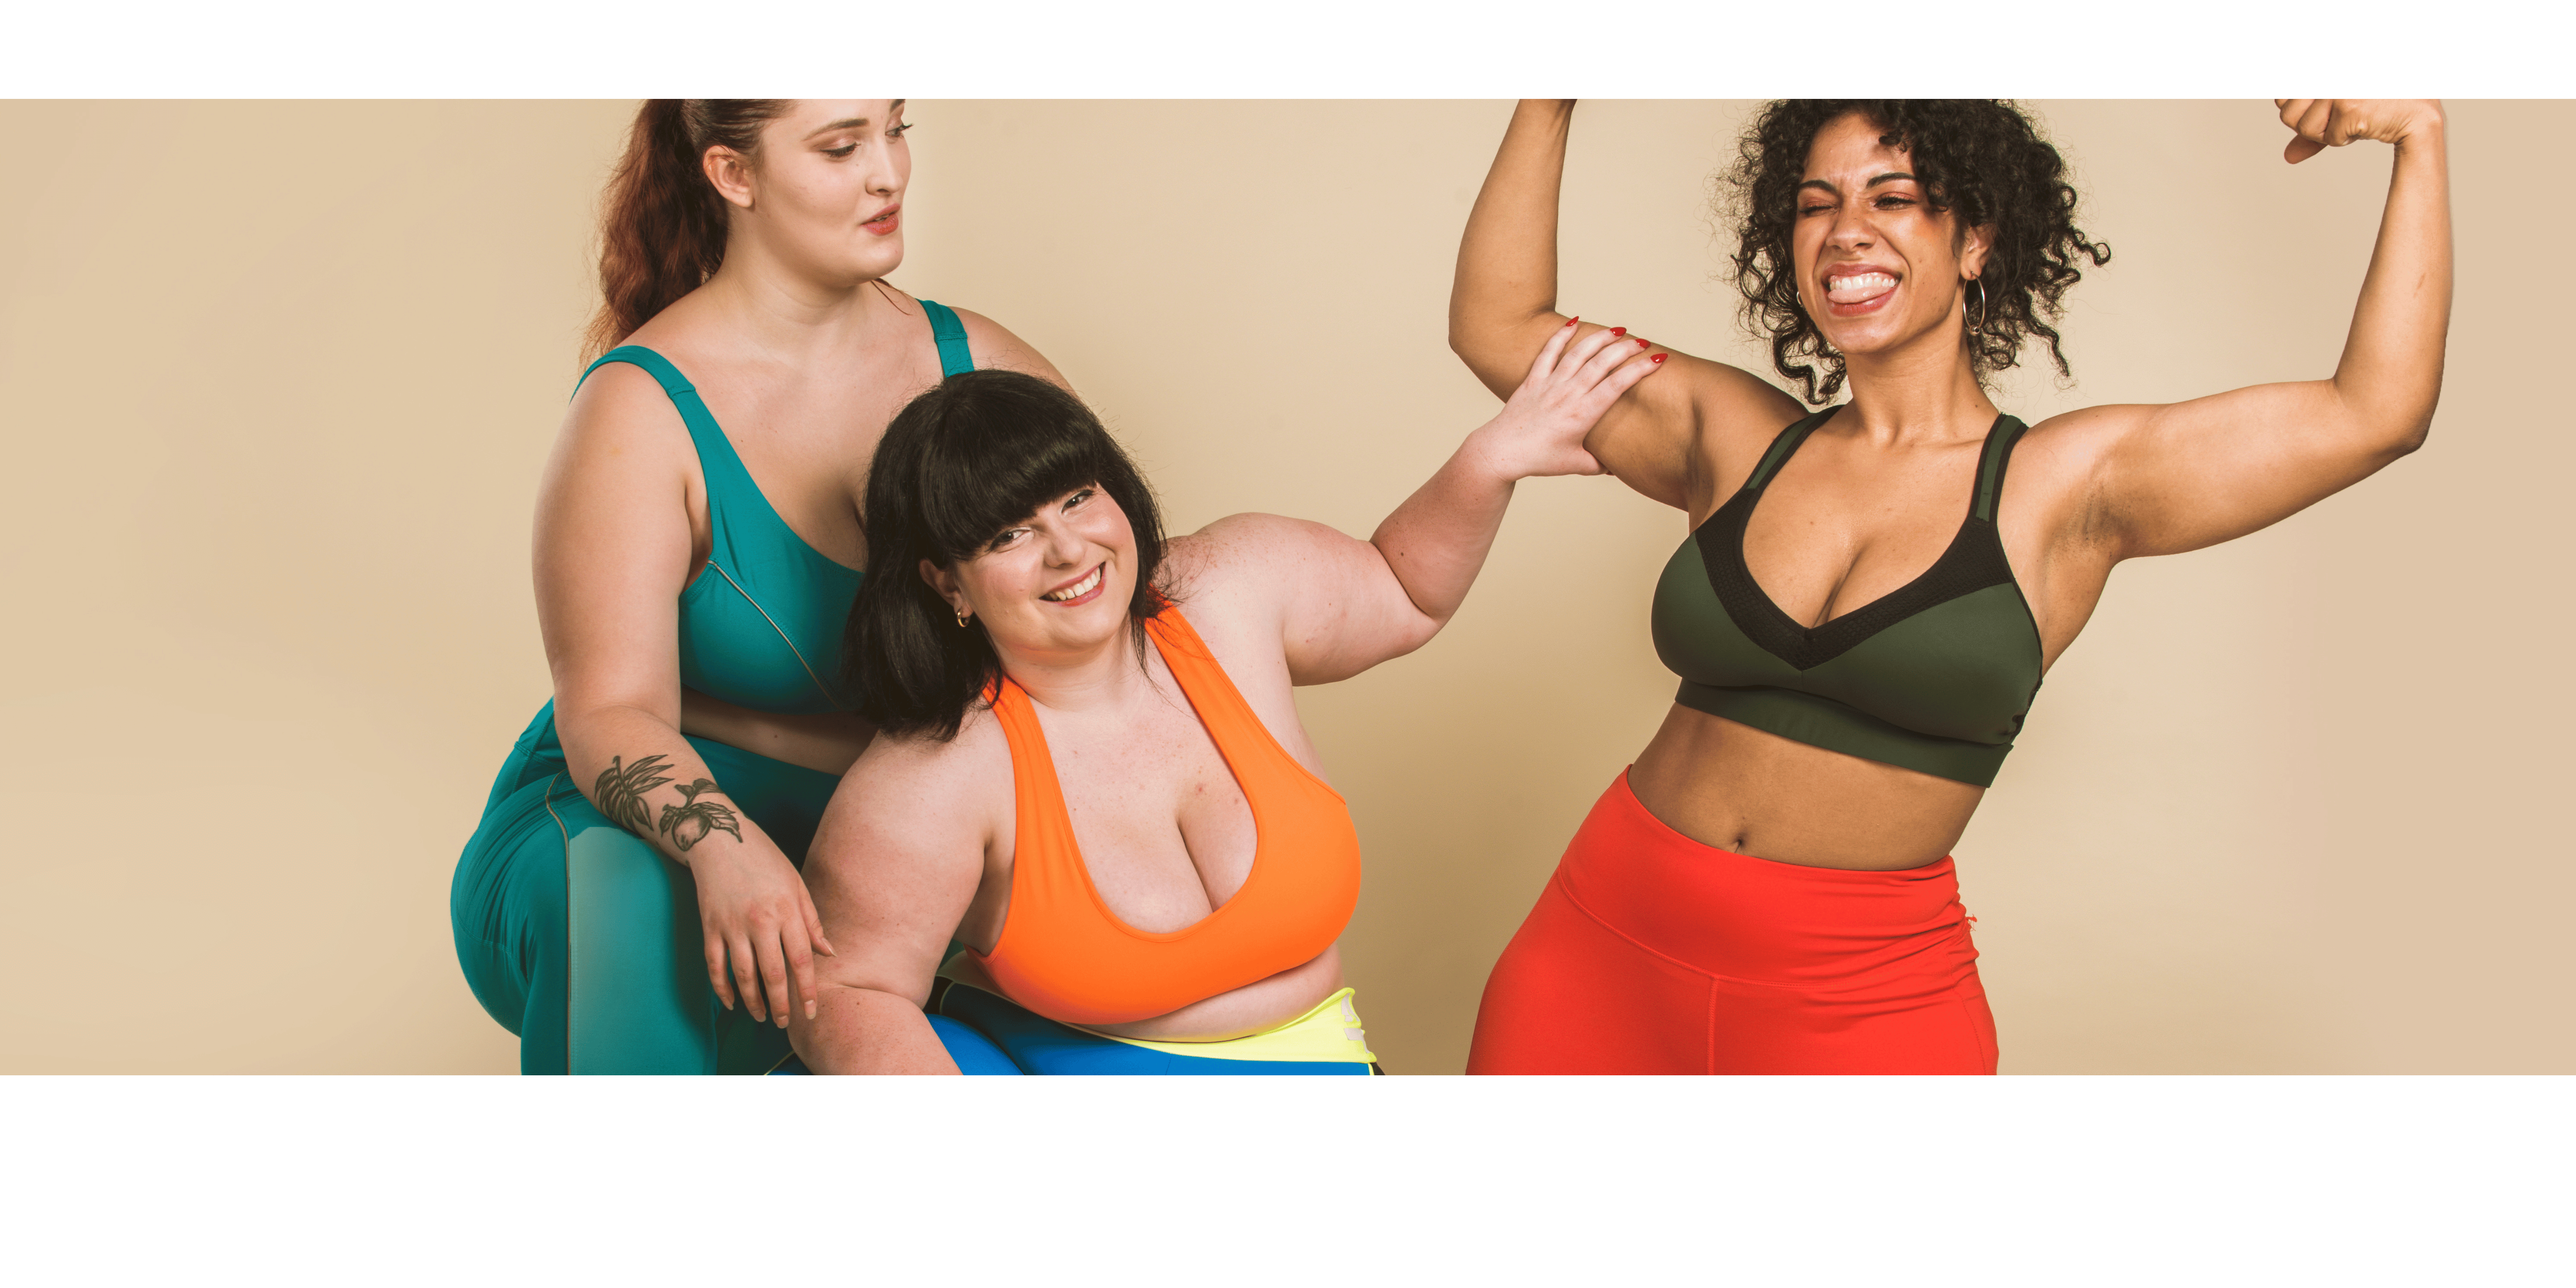 Sports bras for comfortable exercising Plus size sports bras available 